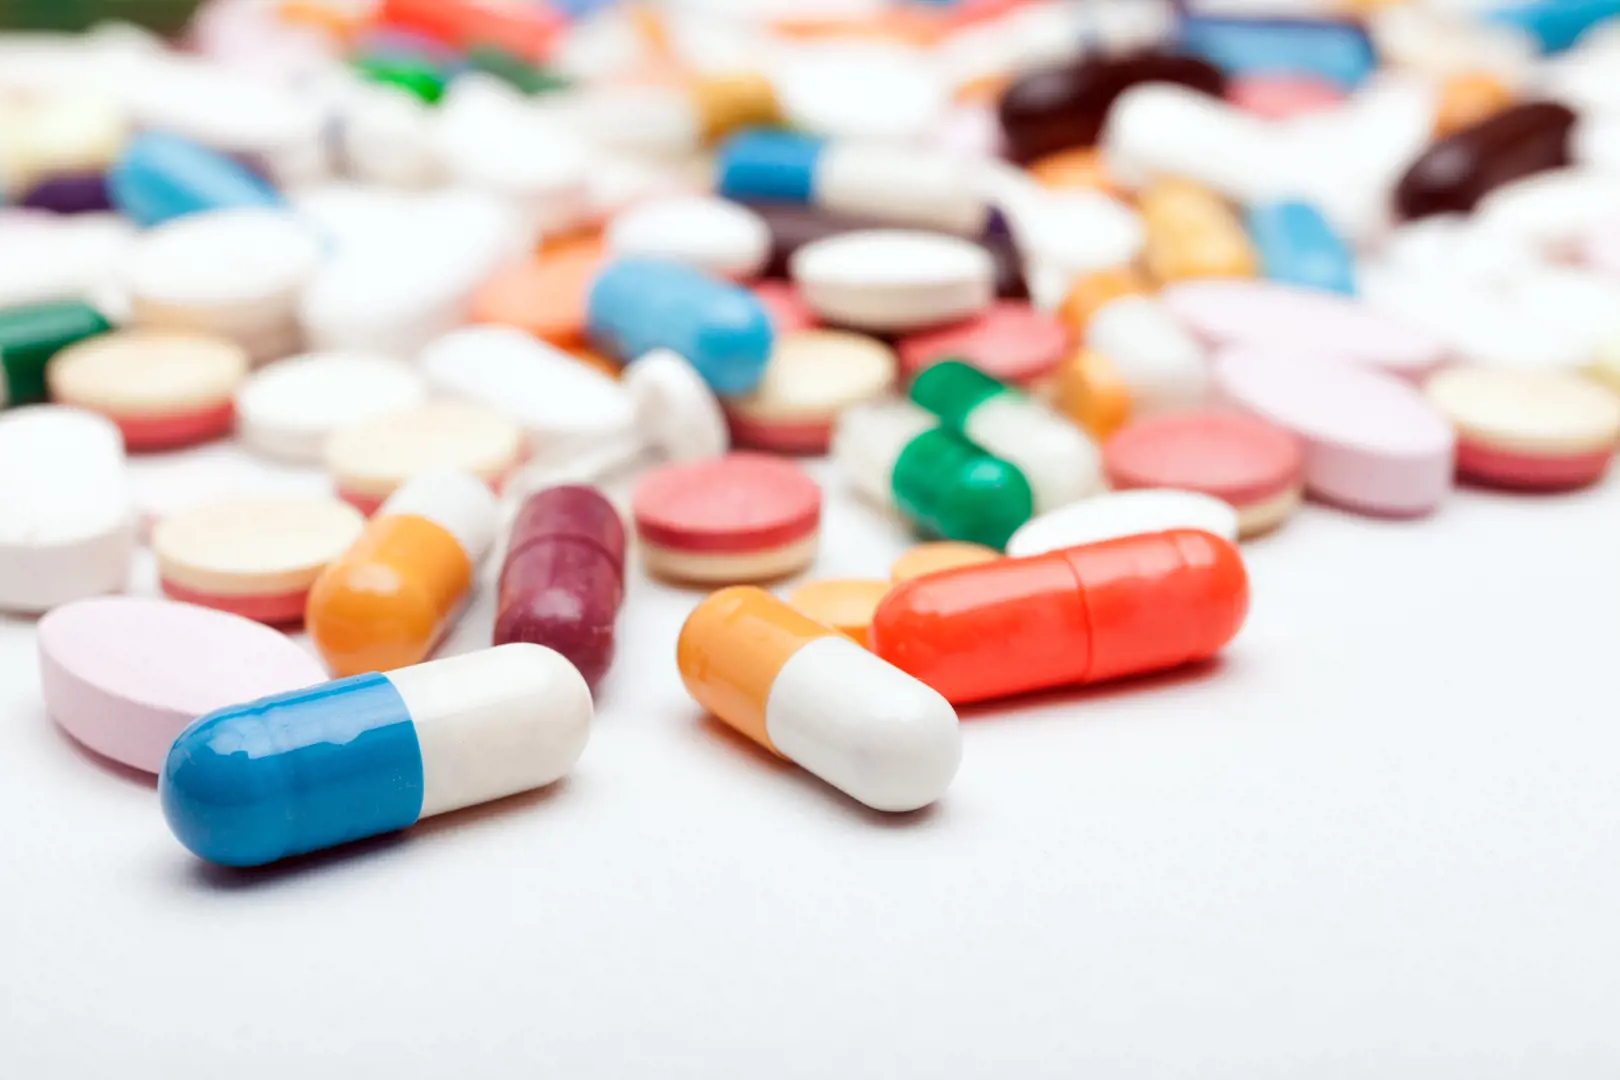 Medicines and supplements in capsules and tablets